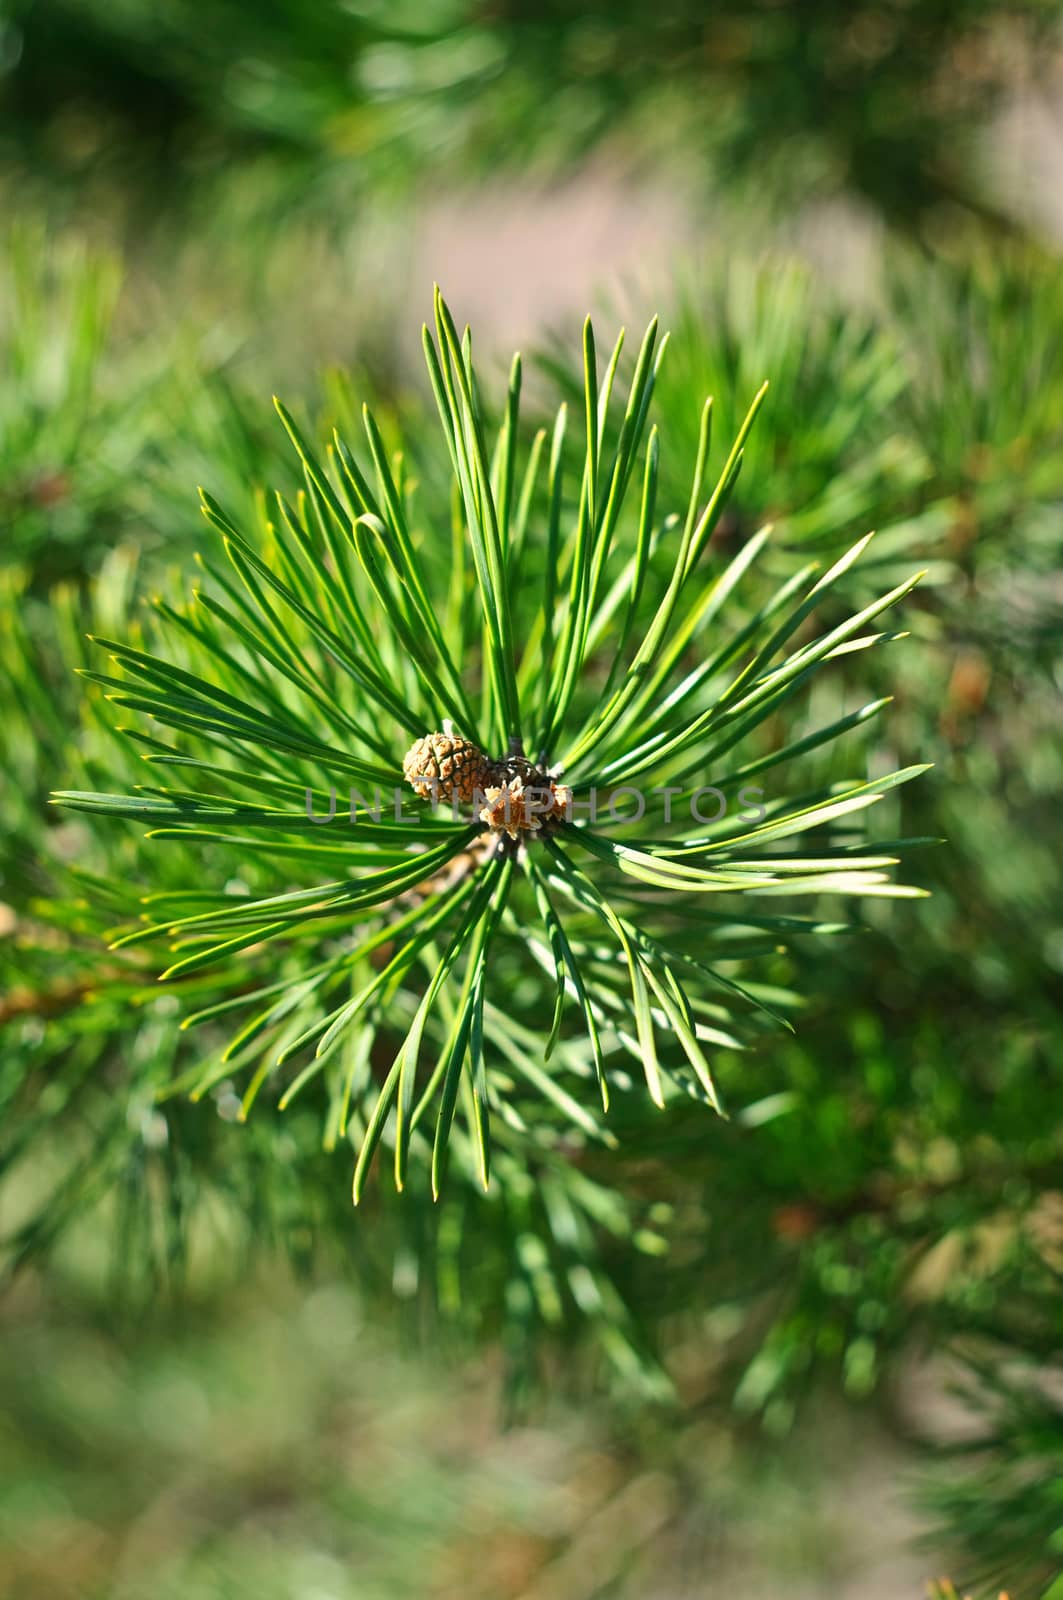 Colorful fresh green young pine branch close-up, Sergiev Posad,  by Eagle2308